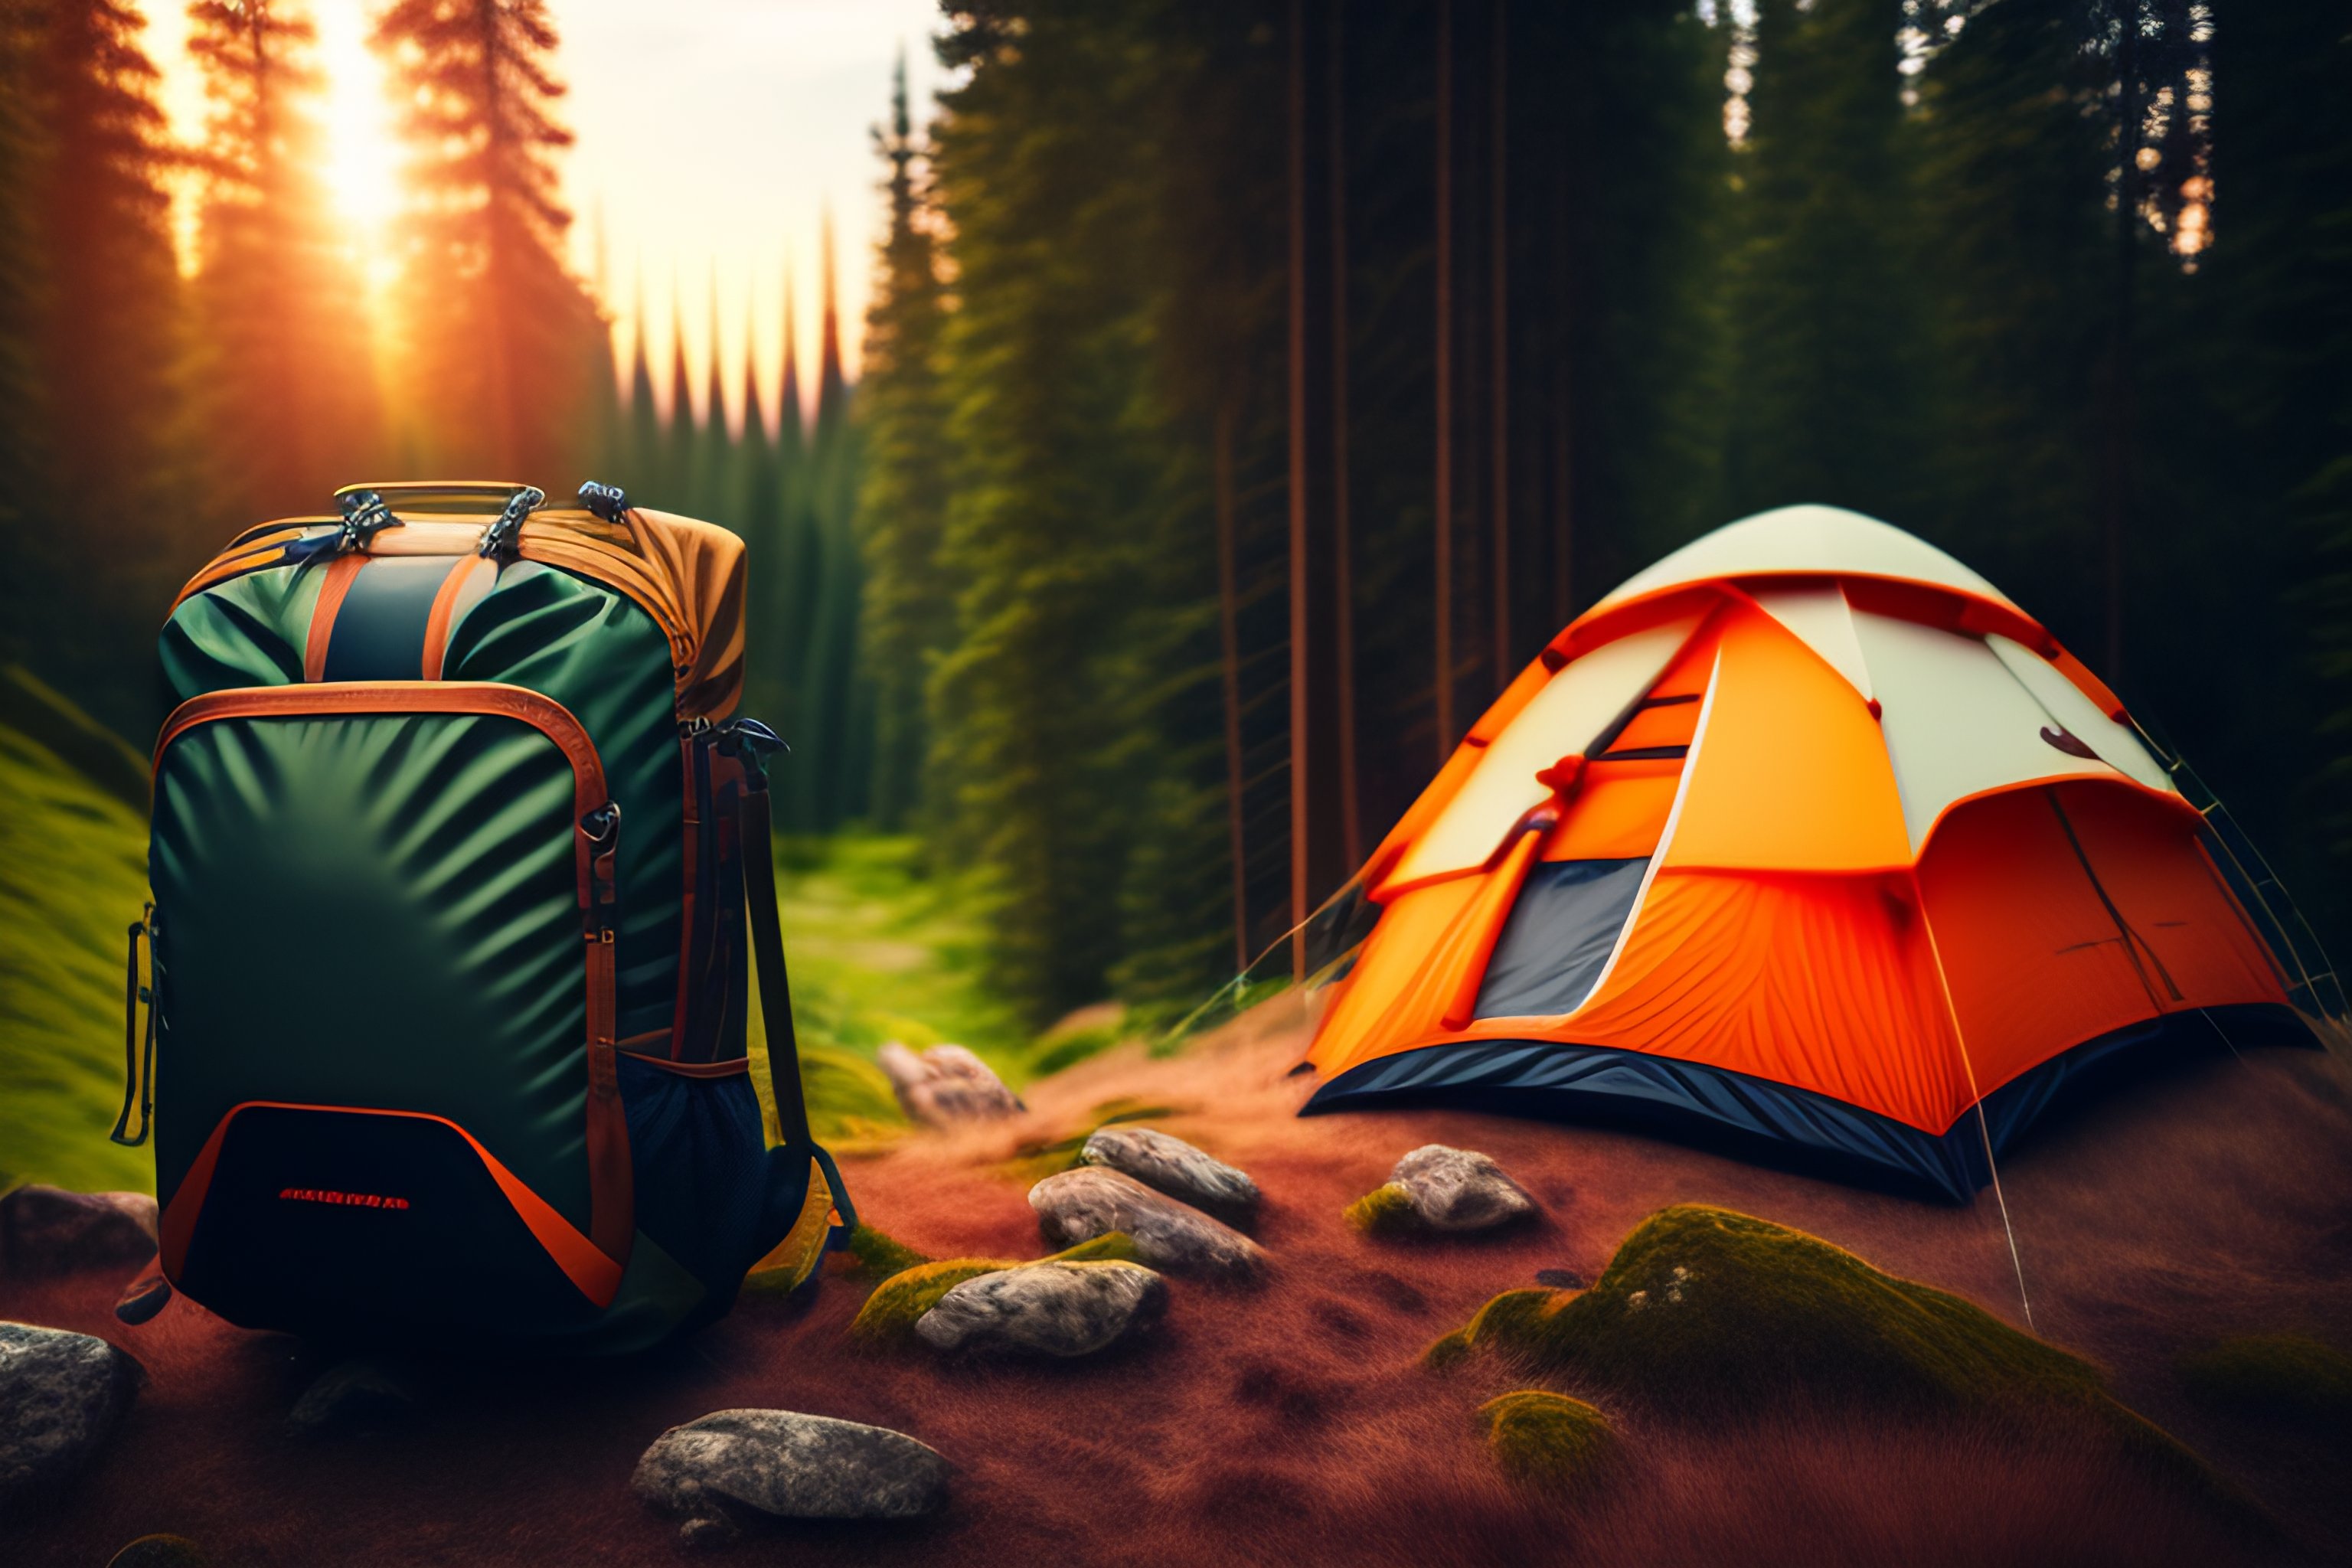 Lexica - Lifestyle hiking camping equipment retro photo camera backpack  outdoor forest nature on background friends cabin